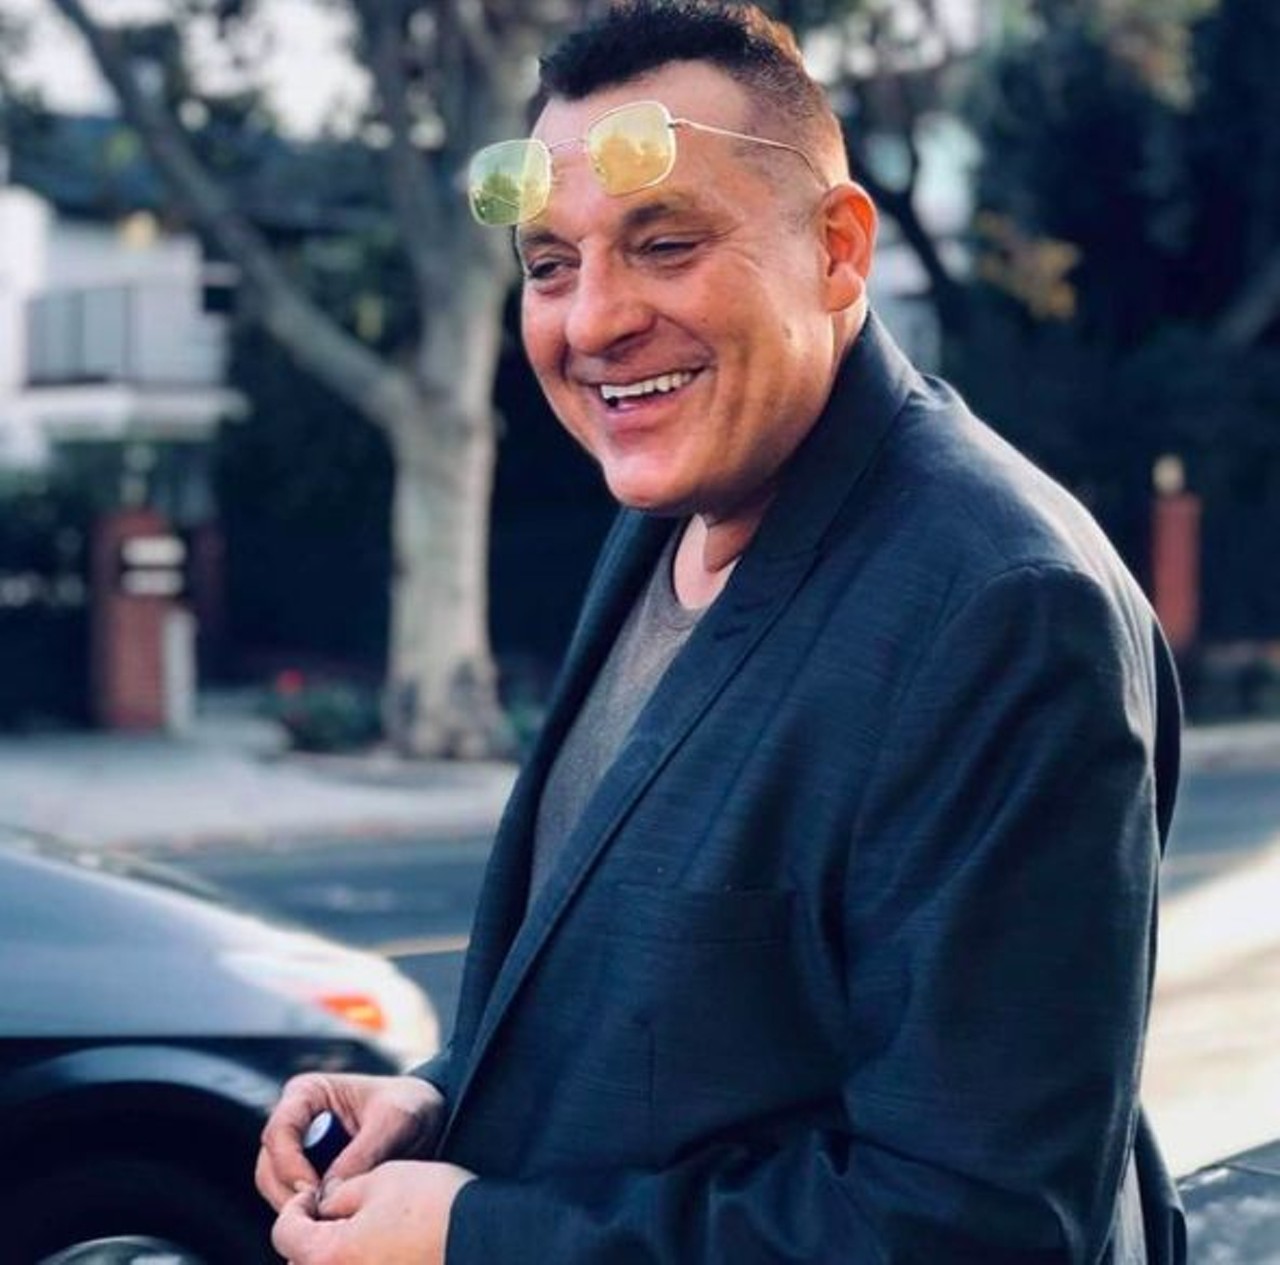 Tom Sizemore
Photo via Instagram
Thomas Sizemore is an actor known for his roles in films such as True Romance, Natural Born Killers, Saving Private Ryan, Black Hawk Down, Pearl Harbor, and for voicing Sonny Forelli in the video game Grand Theft Auto: Vice City.
cameo.com/tom.sizemore